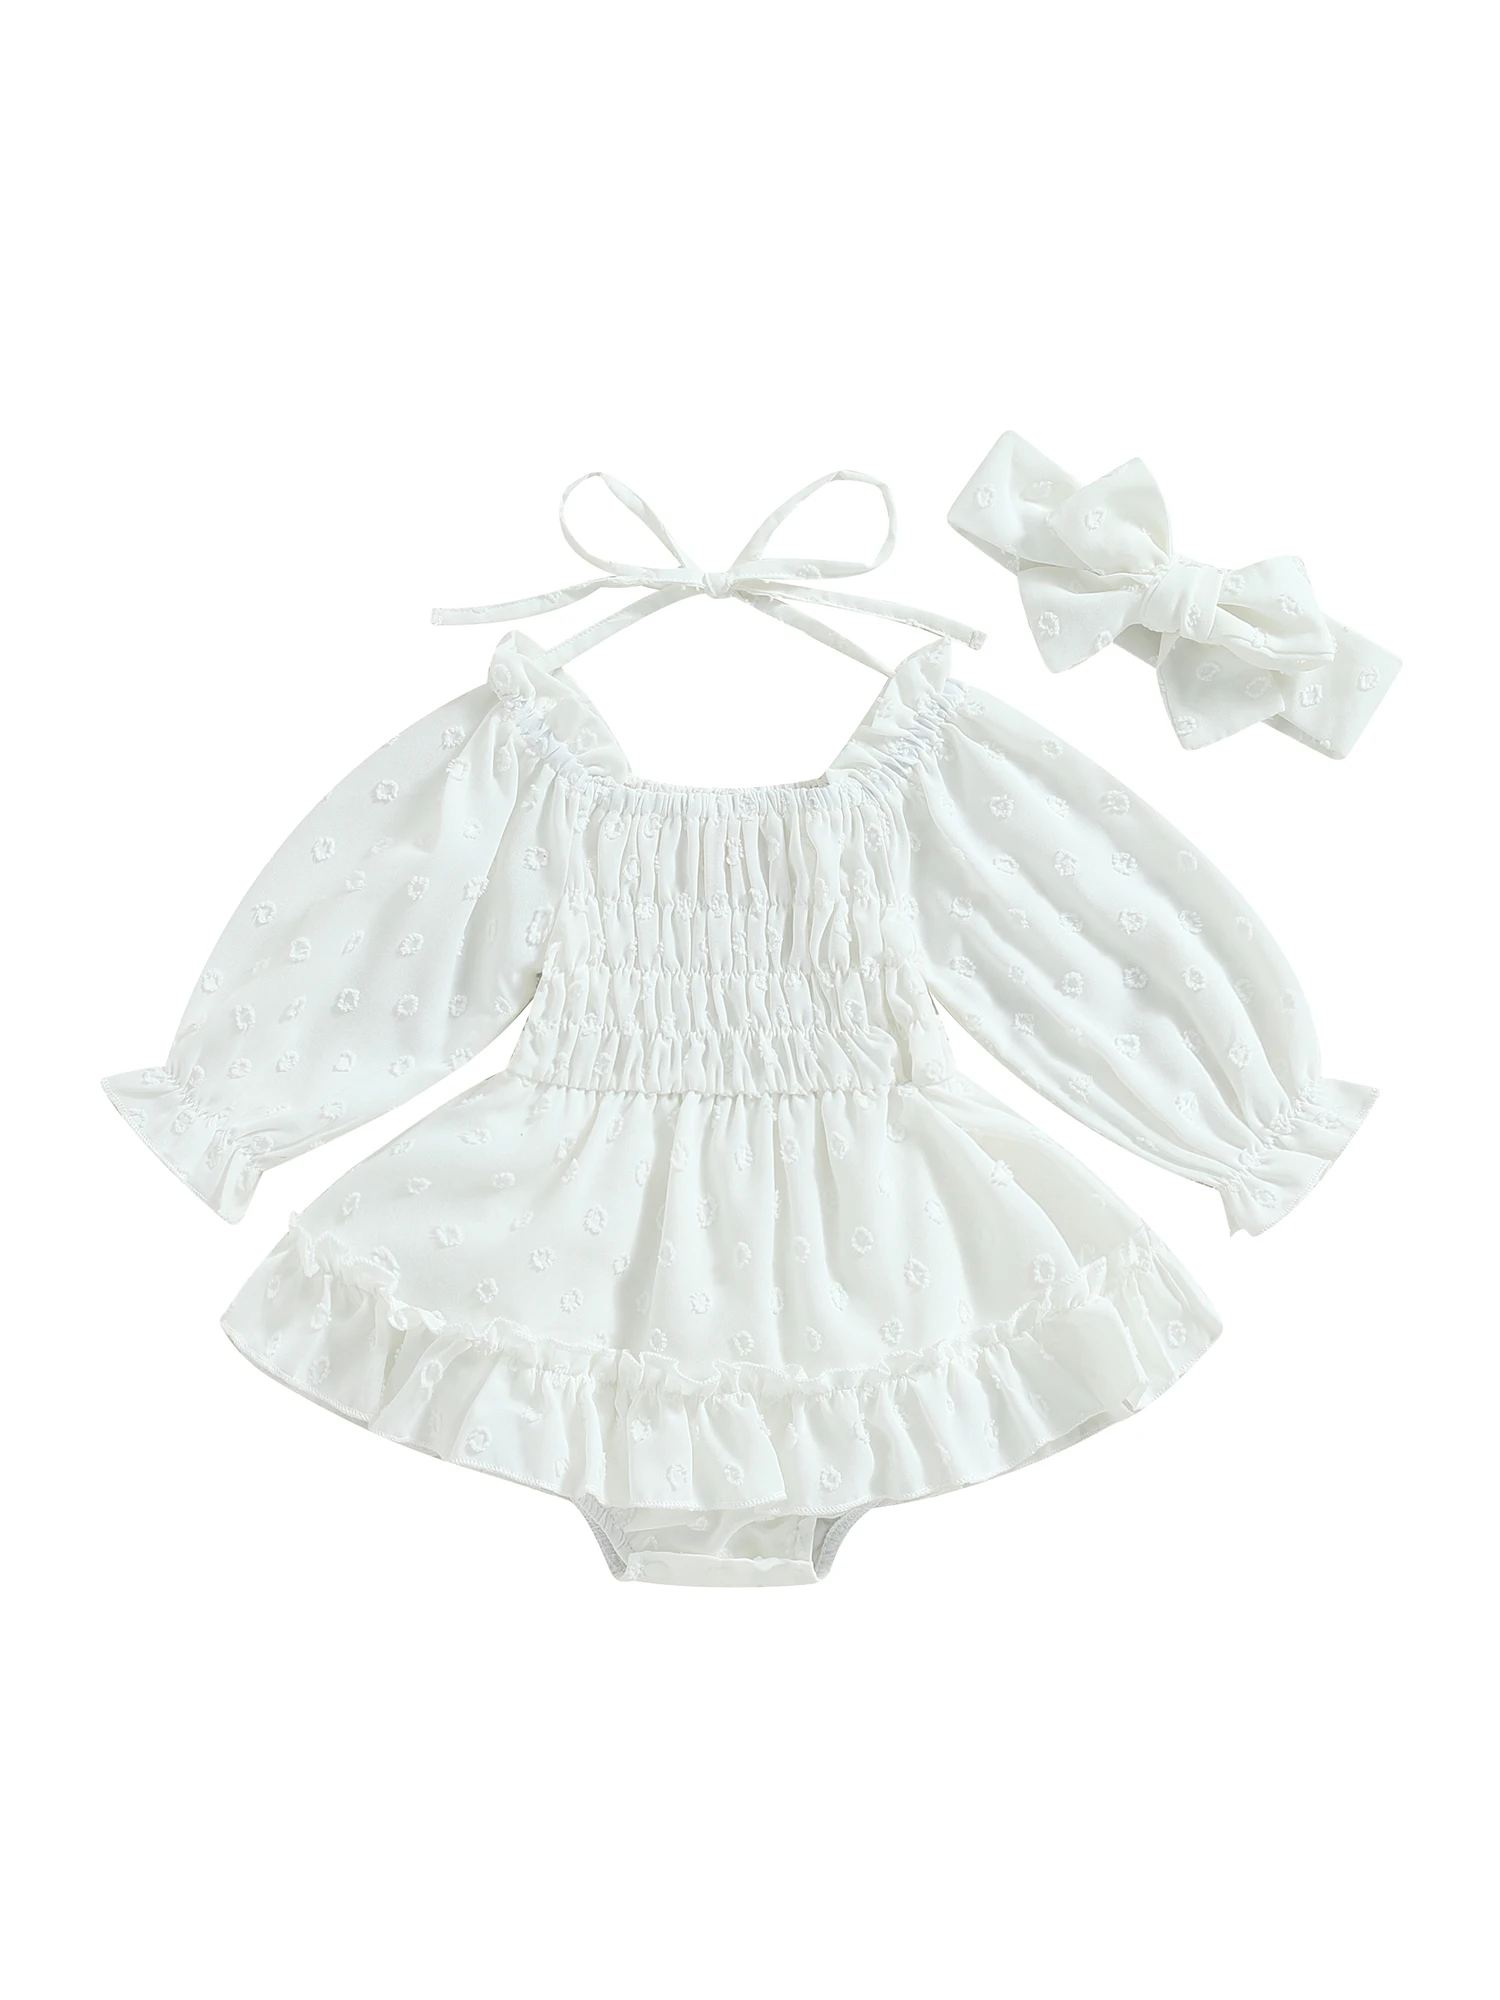 

Baby Girl Floral Print Romper Dress with Lace Details - Adorable Boho Style Summer Outfit for Infants